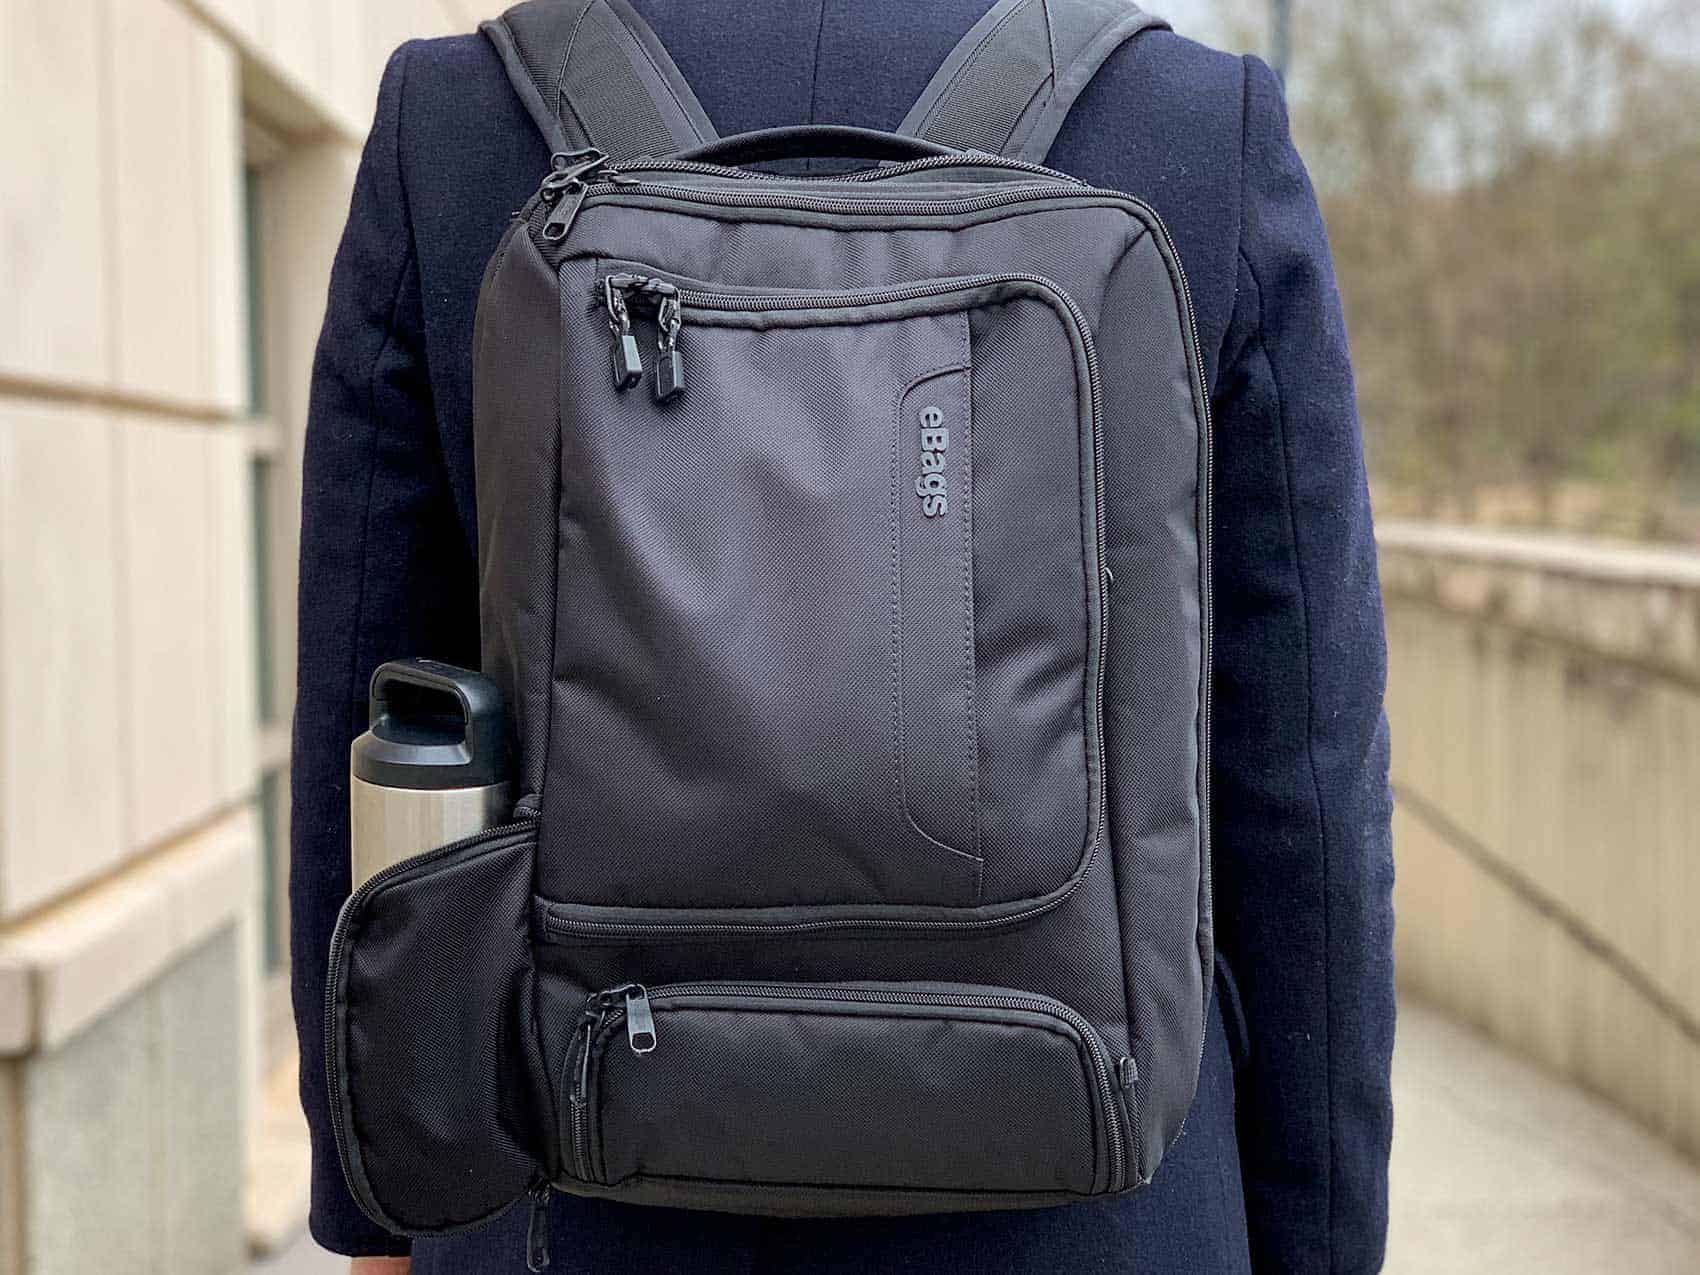 EBags Professional Slim Laptop Backpack Review: Endless Pockets In A Slim Bag